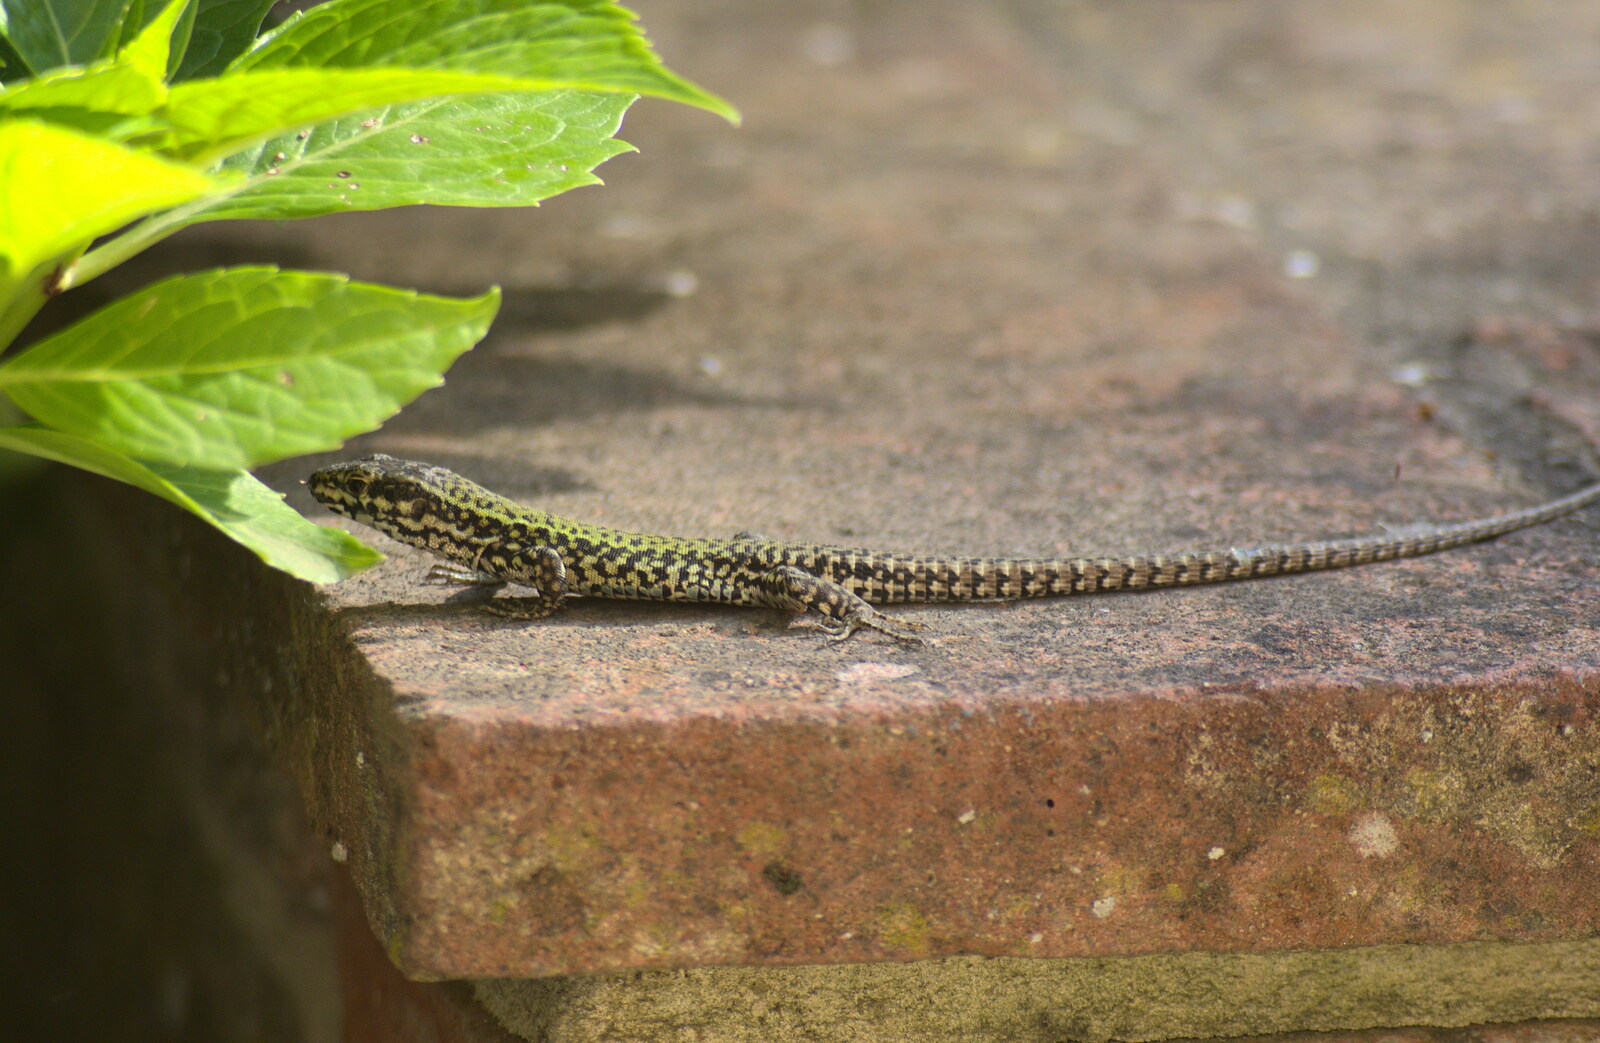 The endless amusement of seeing actual lizards from La Verna Monastery and the Fireflies of Tuscany, Italy - 14th June 2013